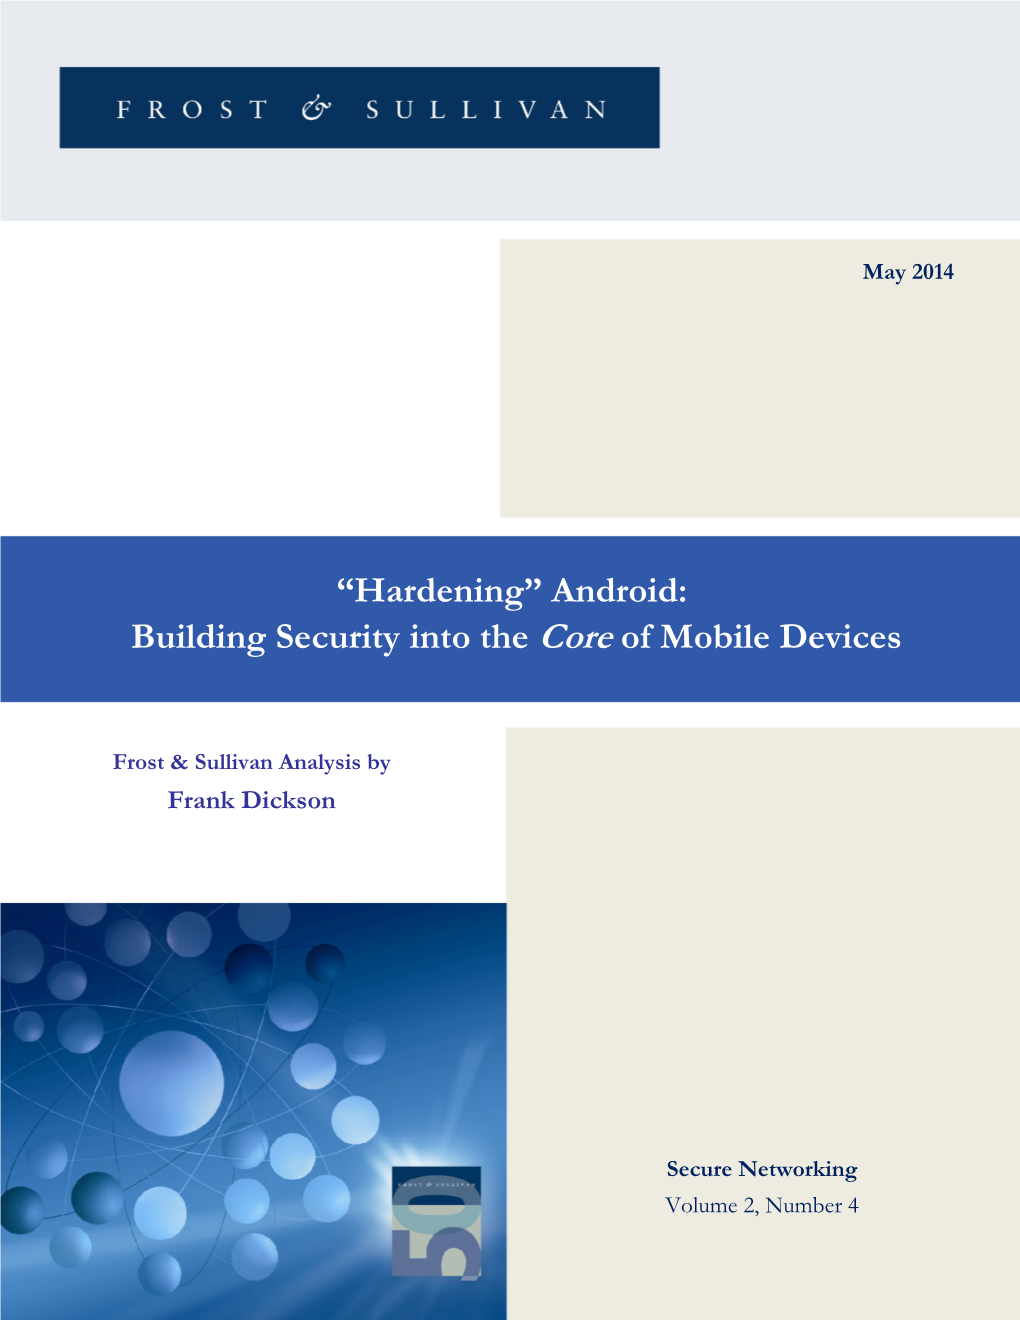 “Hardening” Android: Building Security Into the Core of Mobile Devices